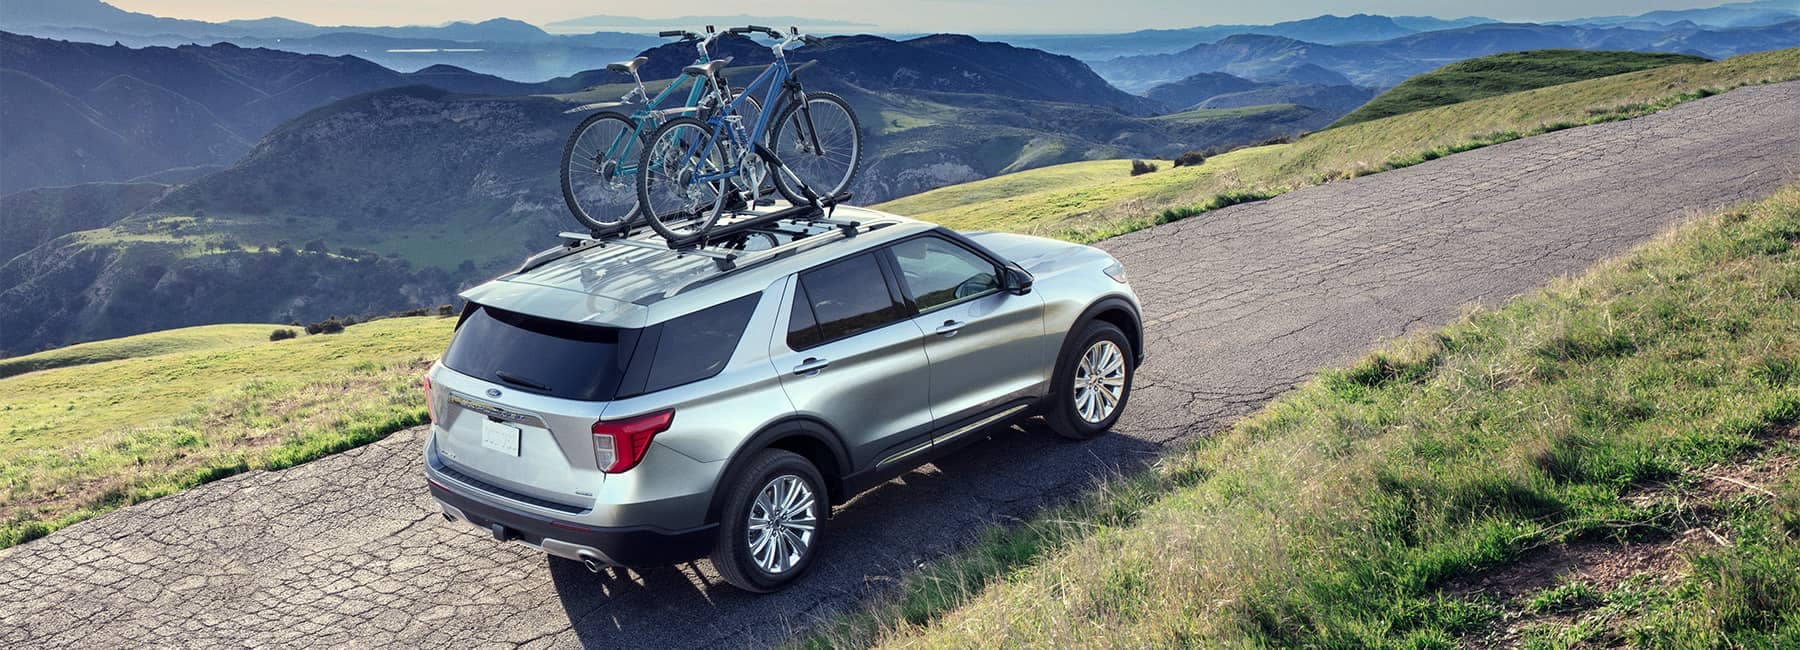 Silver 2022 Ford Explorer on a mountain road